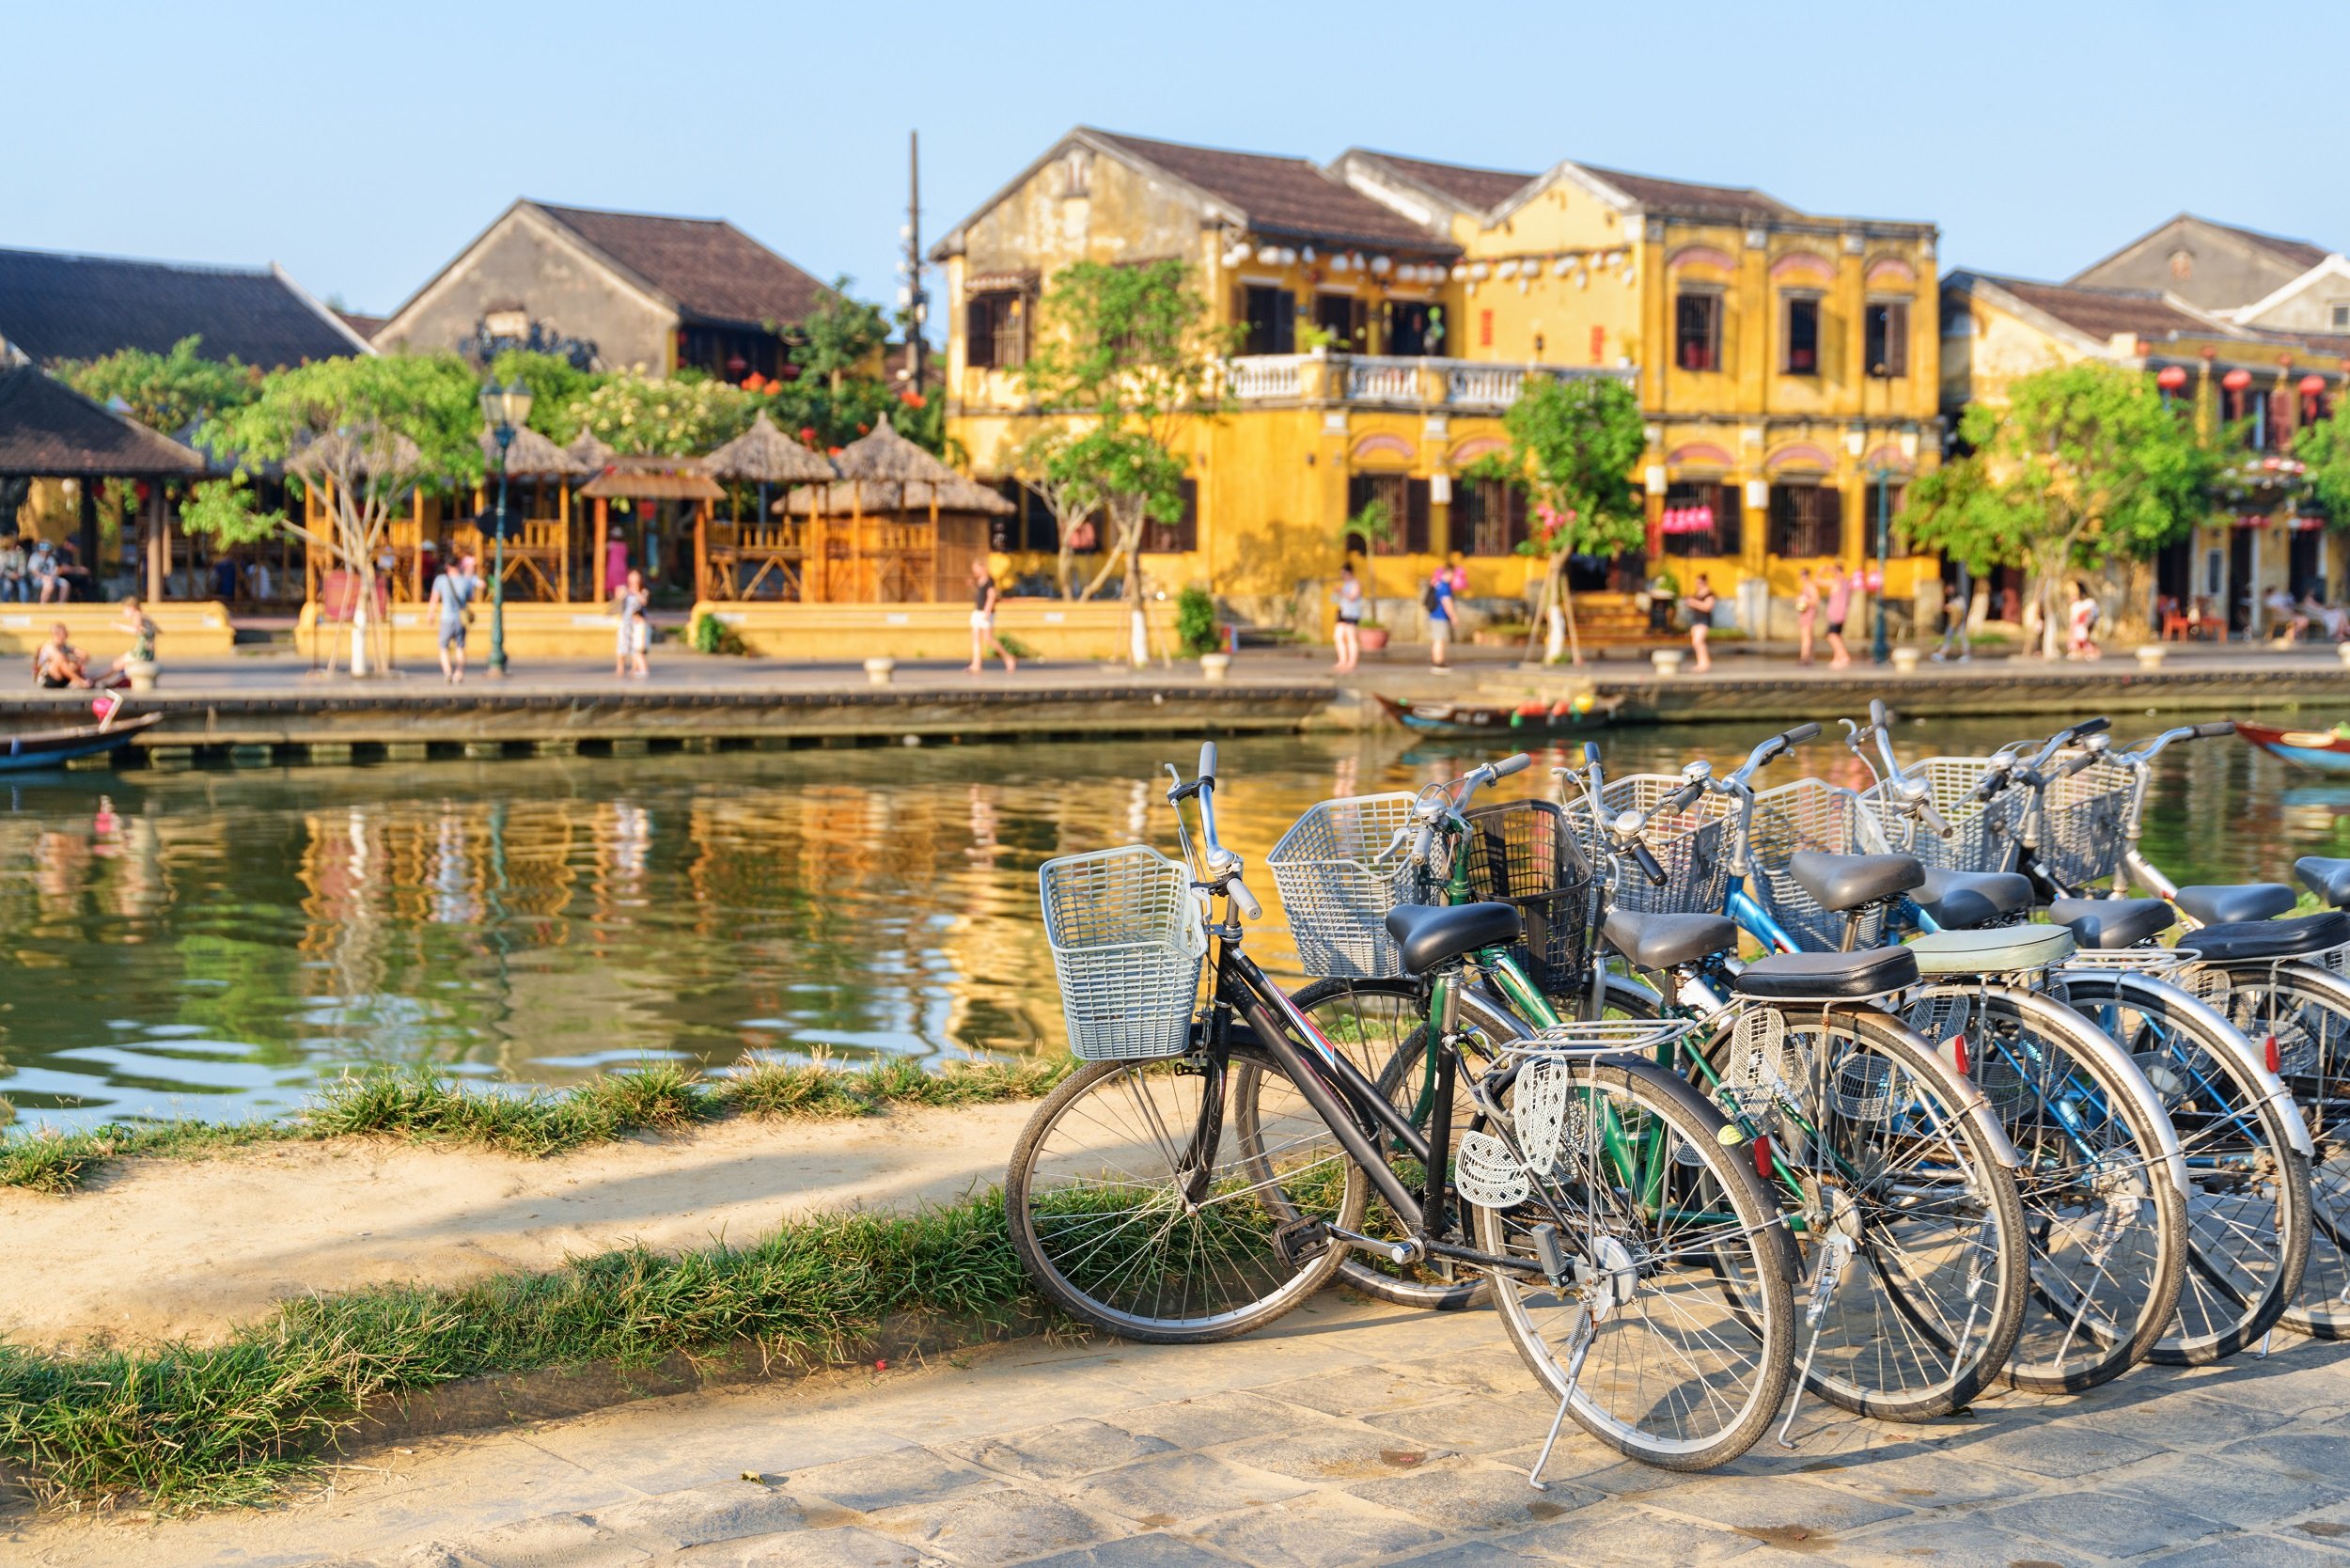 Cycle Through The City Of Hoi An On The Wonders Of Vietnam, Cambodia & Thailand 15 Day Package Tour